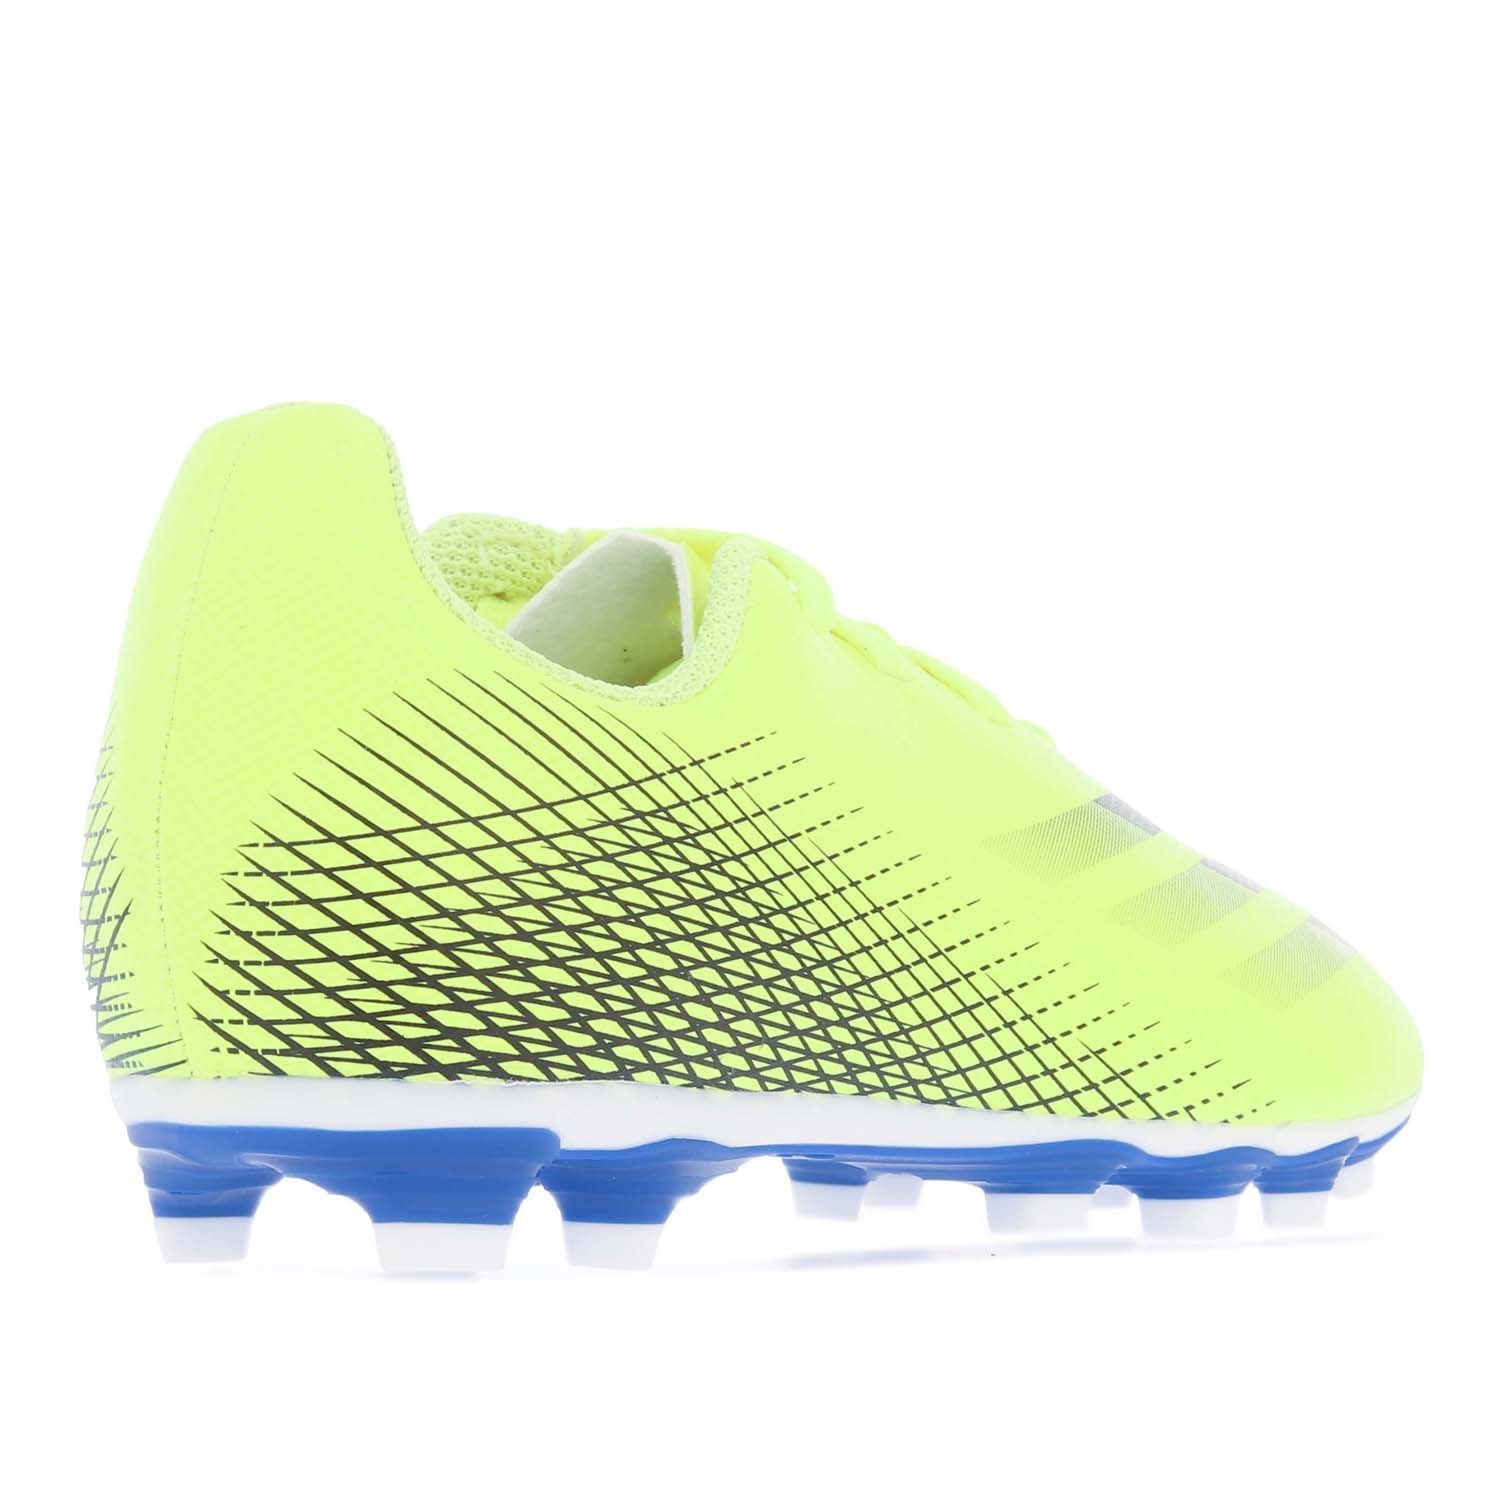 Children Boys adidas X Ghosted.4 FxG Football Boots in yellow.- Lightweight synthetic upper. - Lace closure. - Low-cut collar. - Padded ankle. - Flexible ground outsole.- Synthetic upper  Textile lining  Synthetic sole.  - Ref.: FW6933C